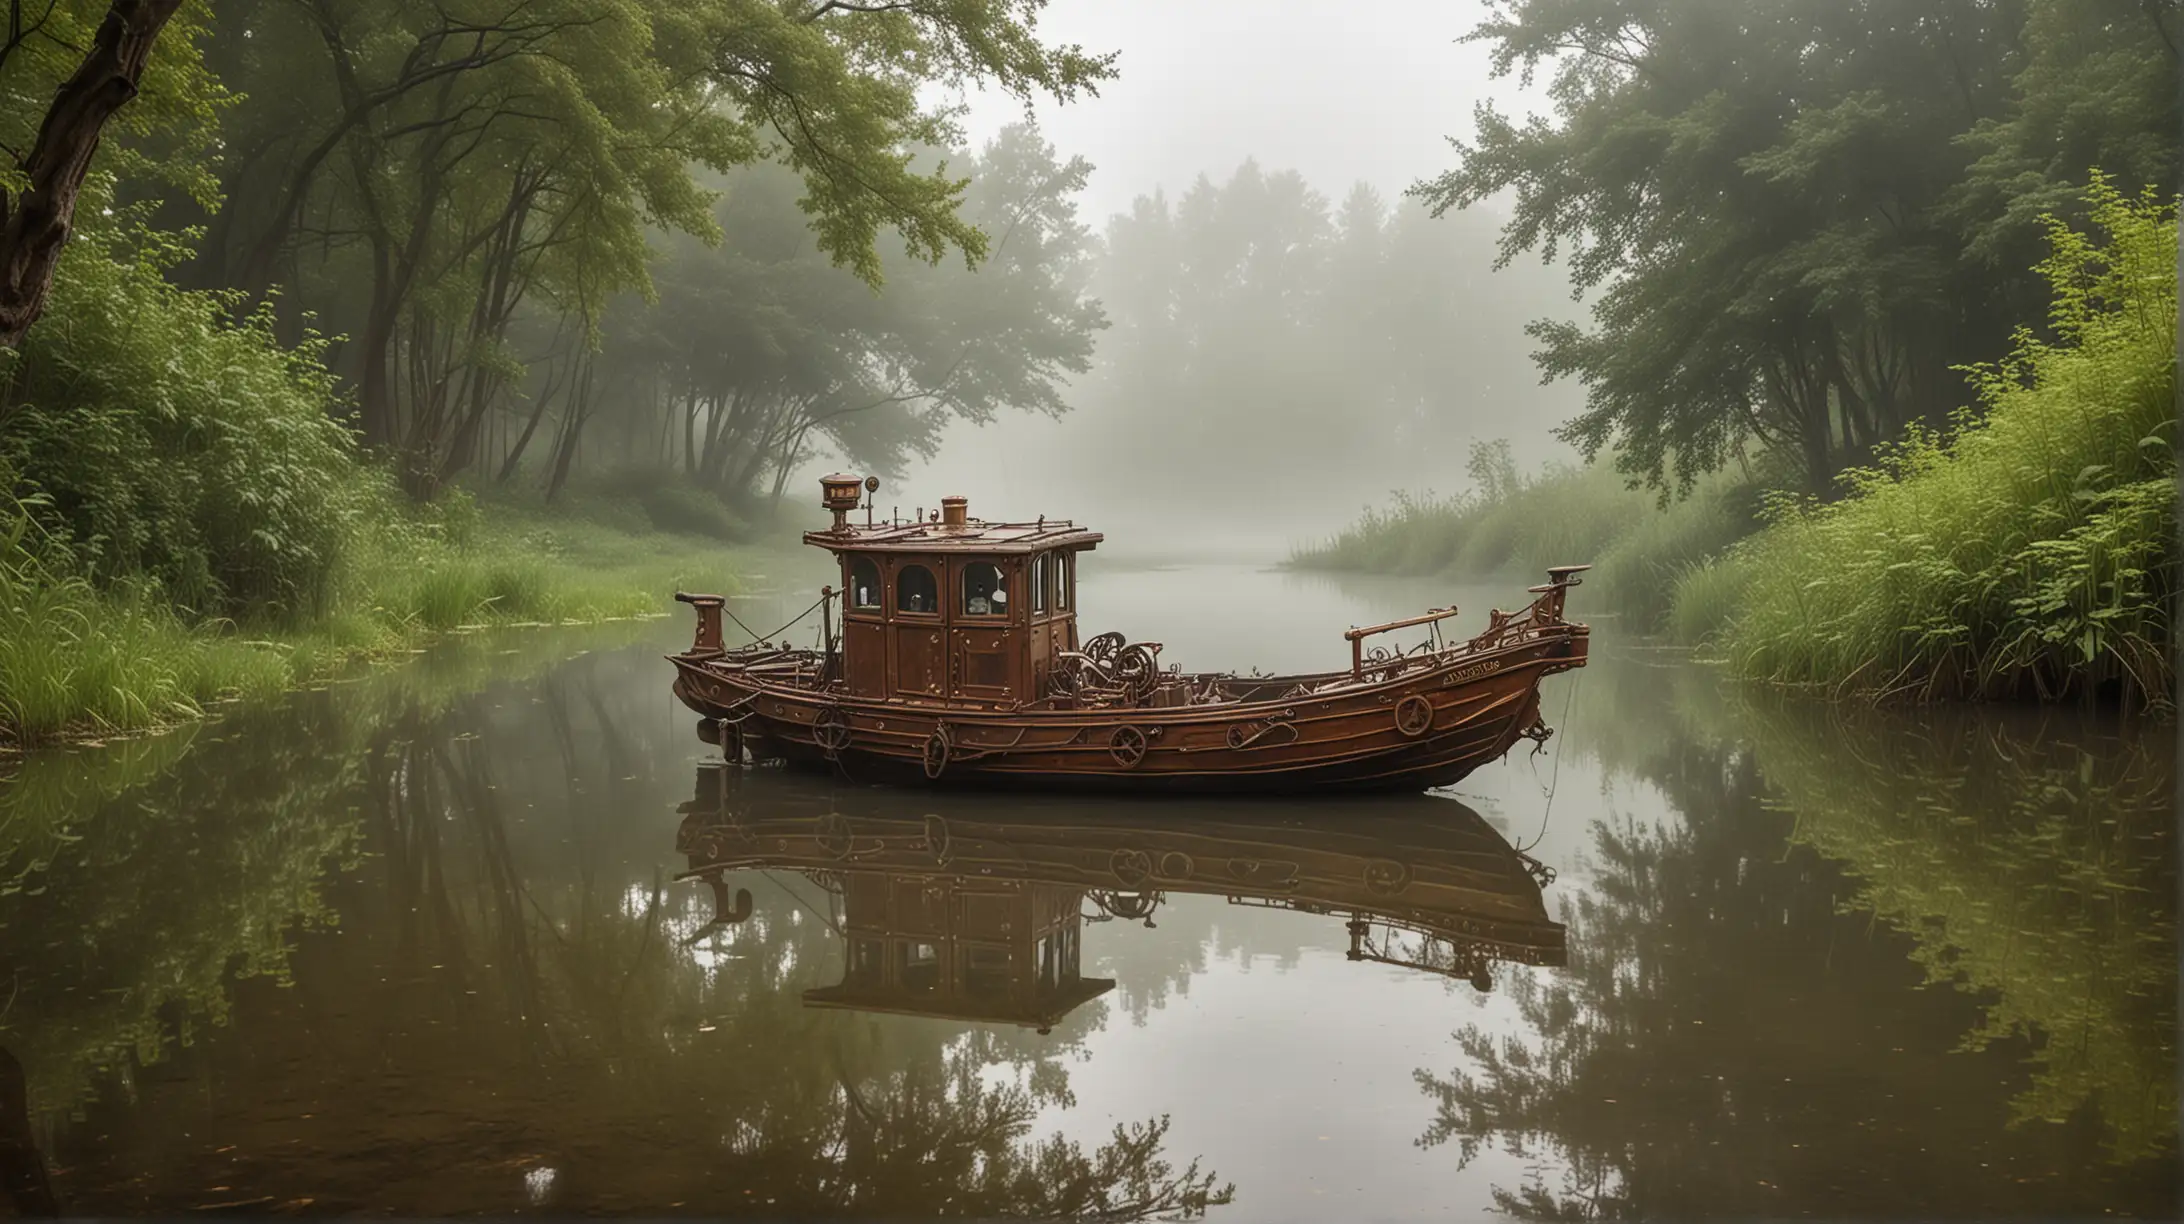 Steampunk Boat Moored by Wild Pond in a Misty Park